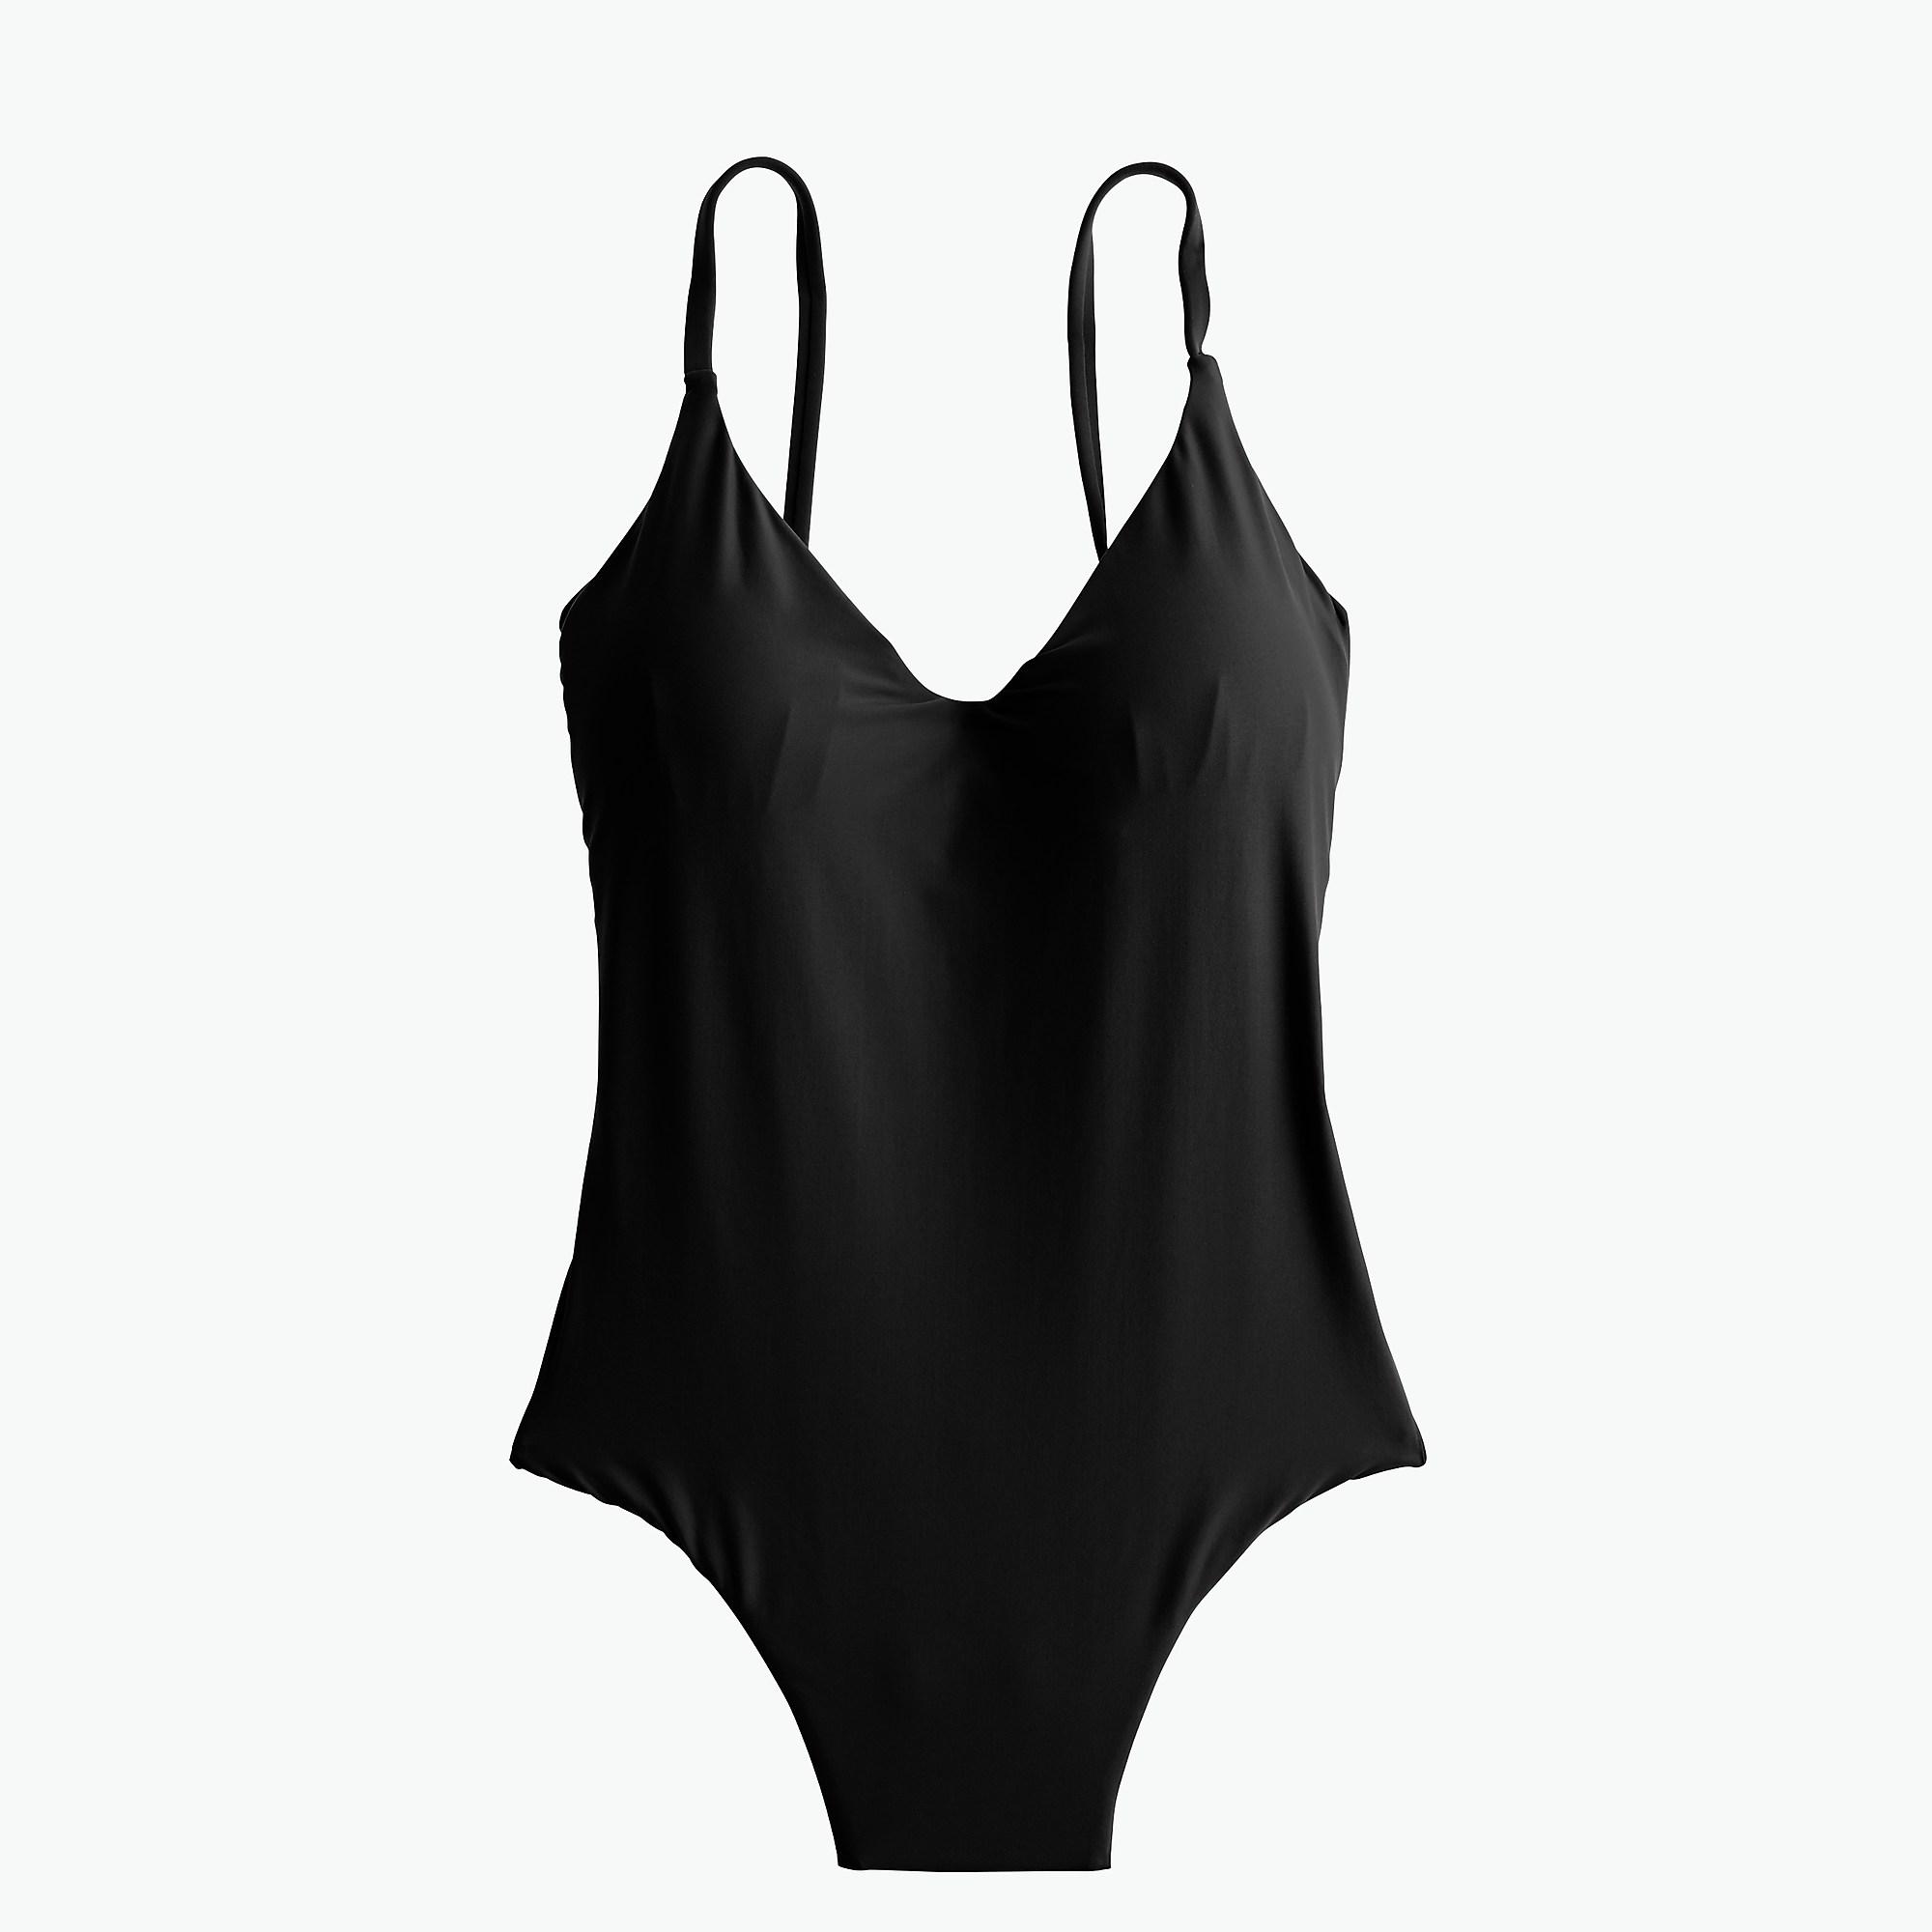 J.Crew Rounded V-neck One-piece Swimsuit in Black - Lyst